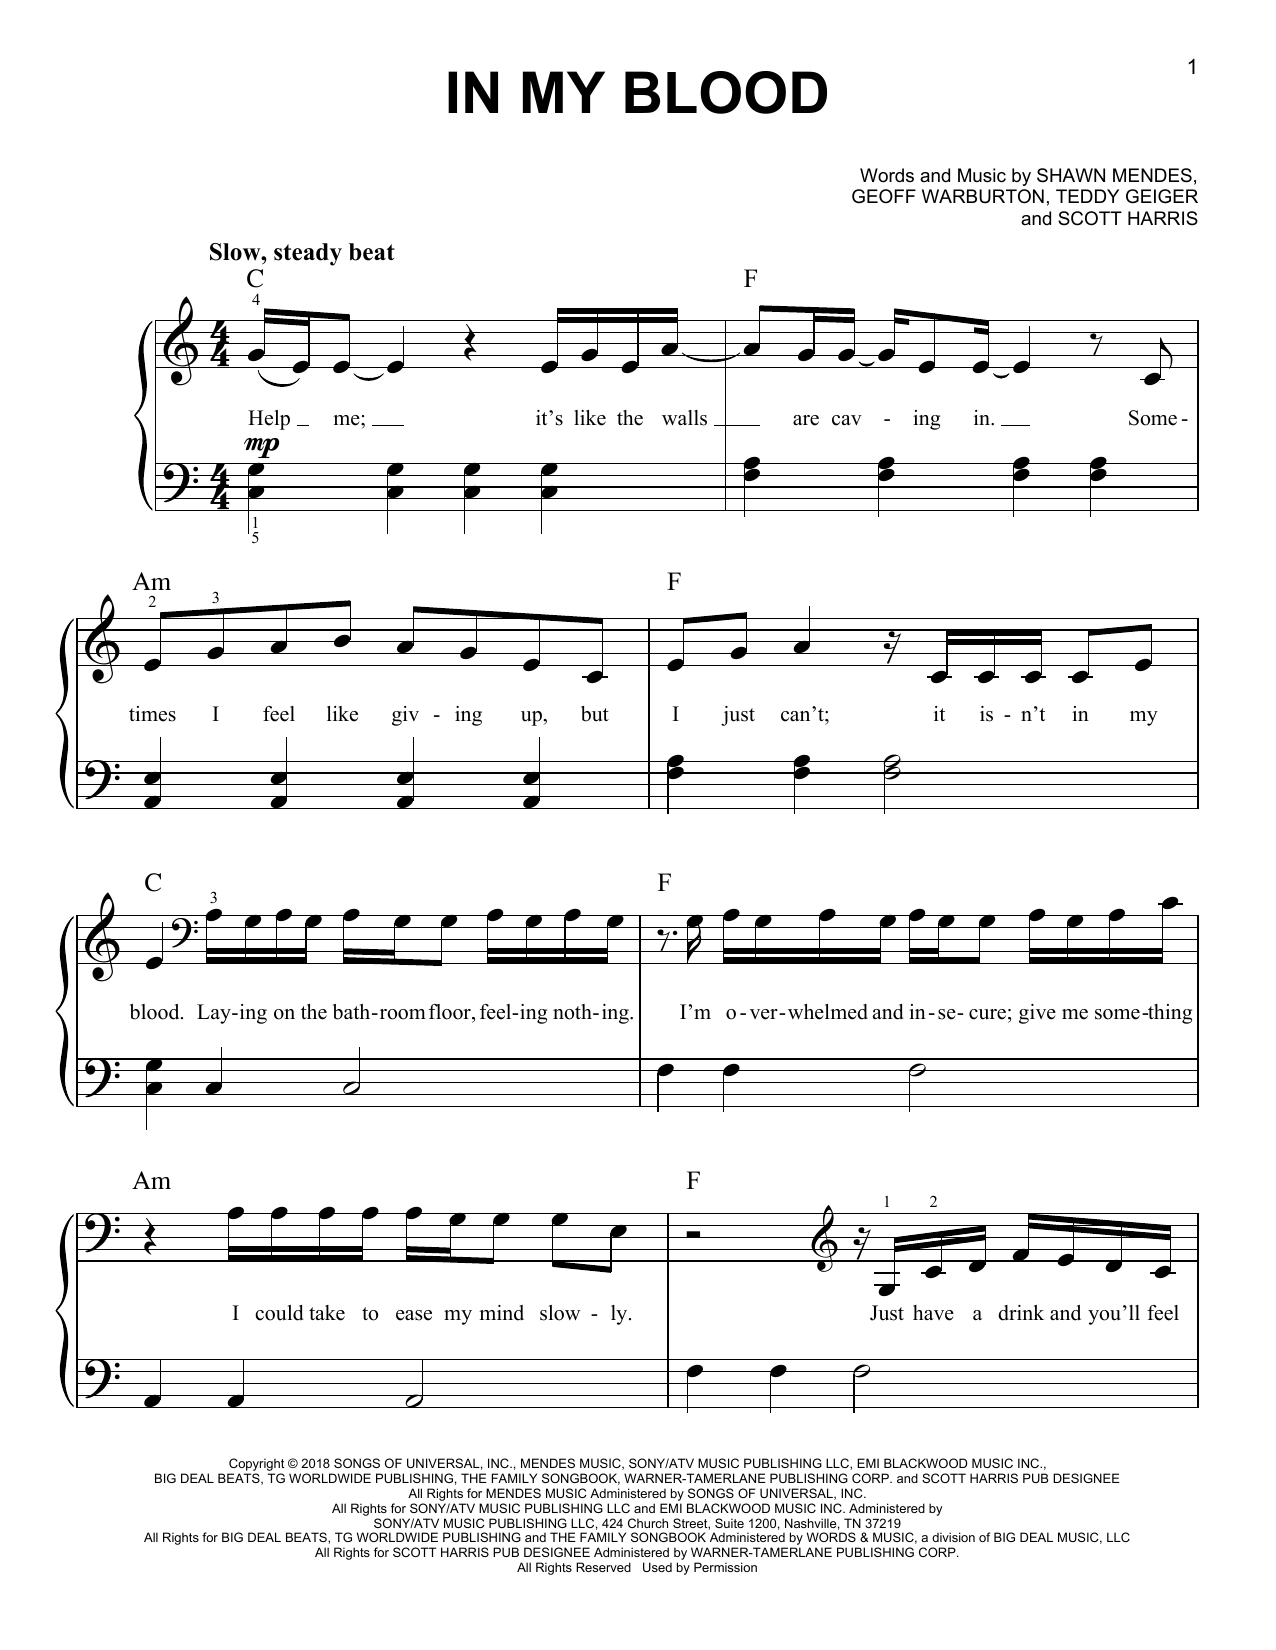 Download Shawn Mendes In My Blood Sheet Music